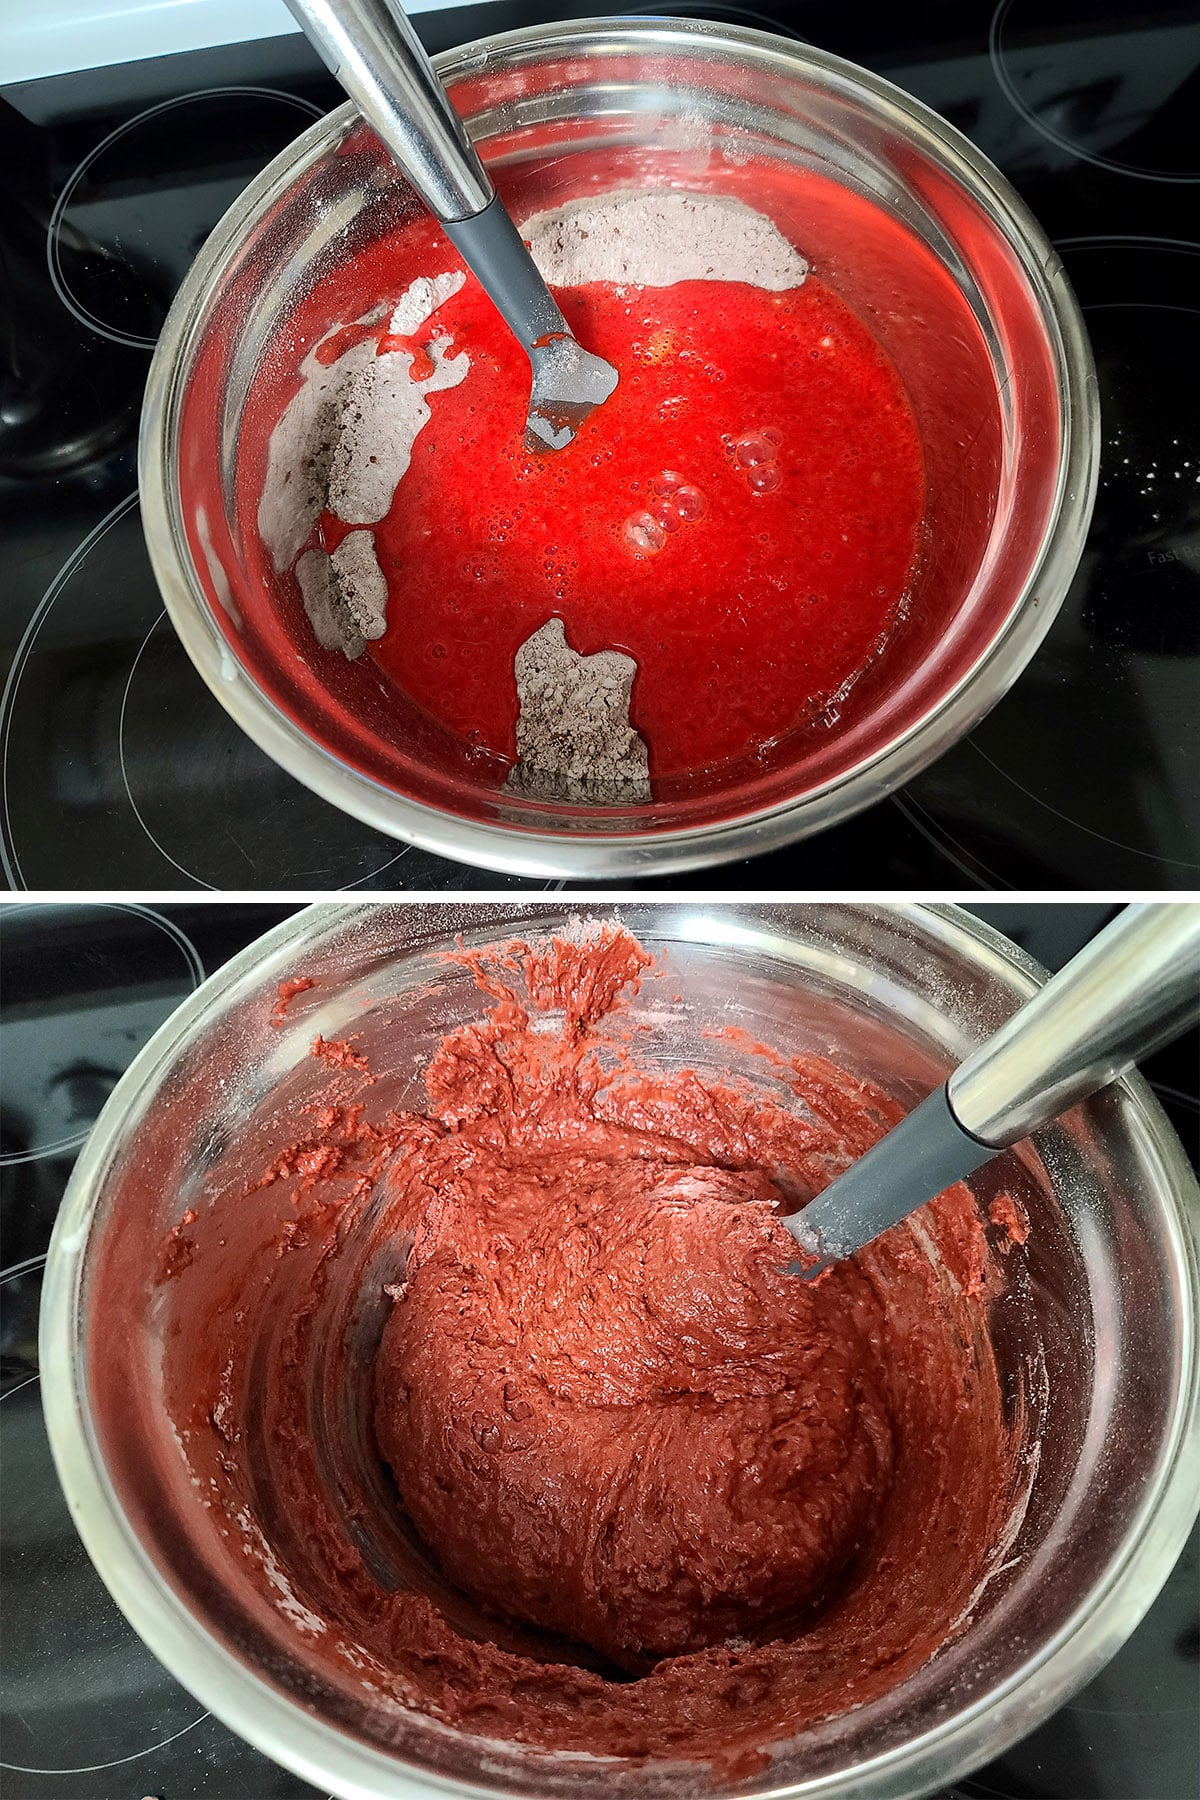 A 2 part image showing the red velvet batter being mixed.